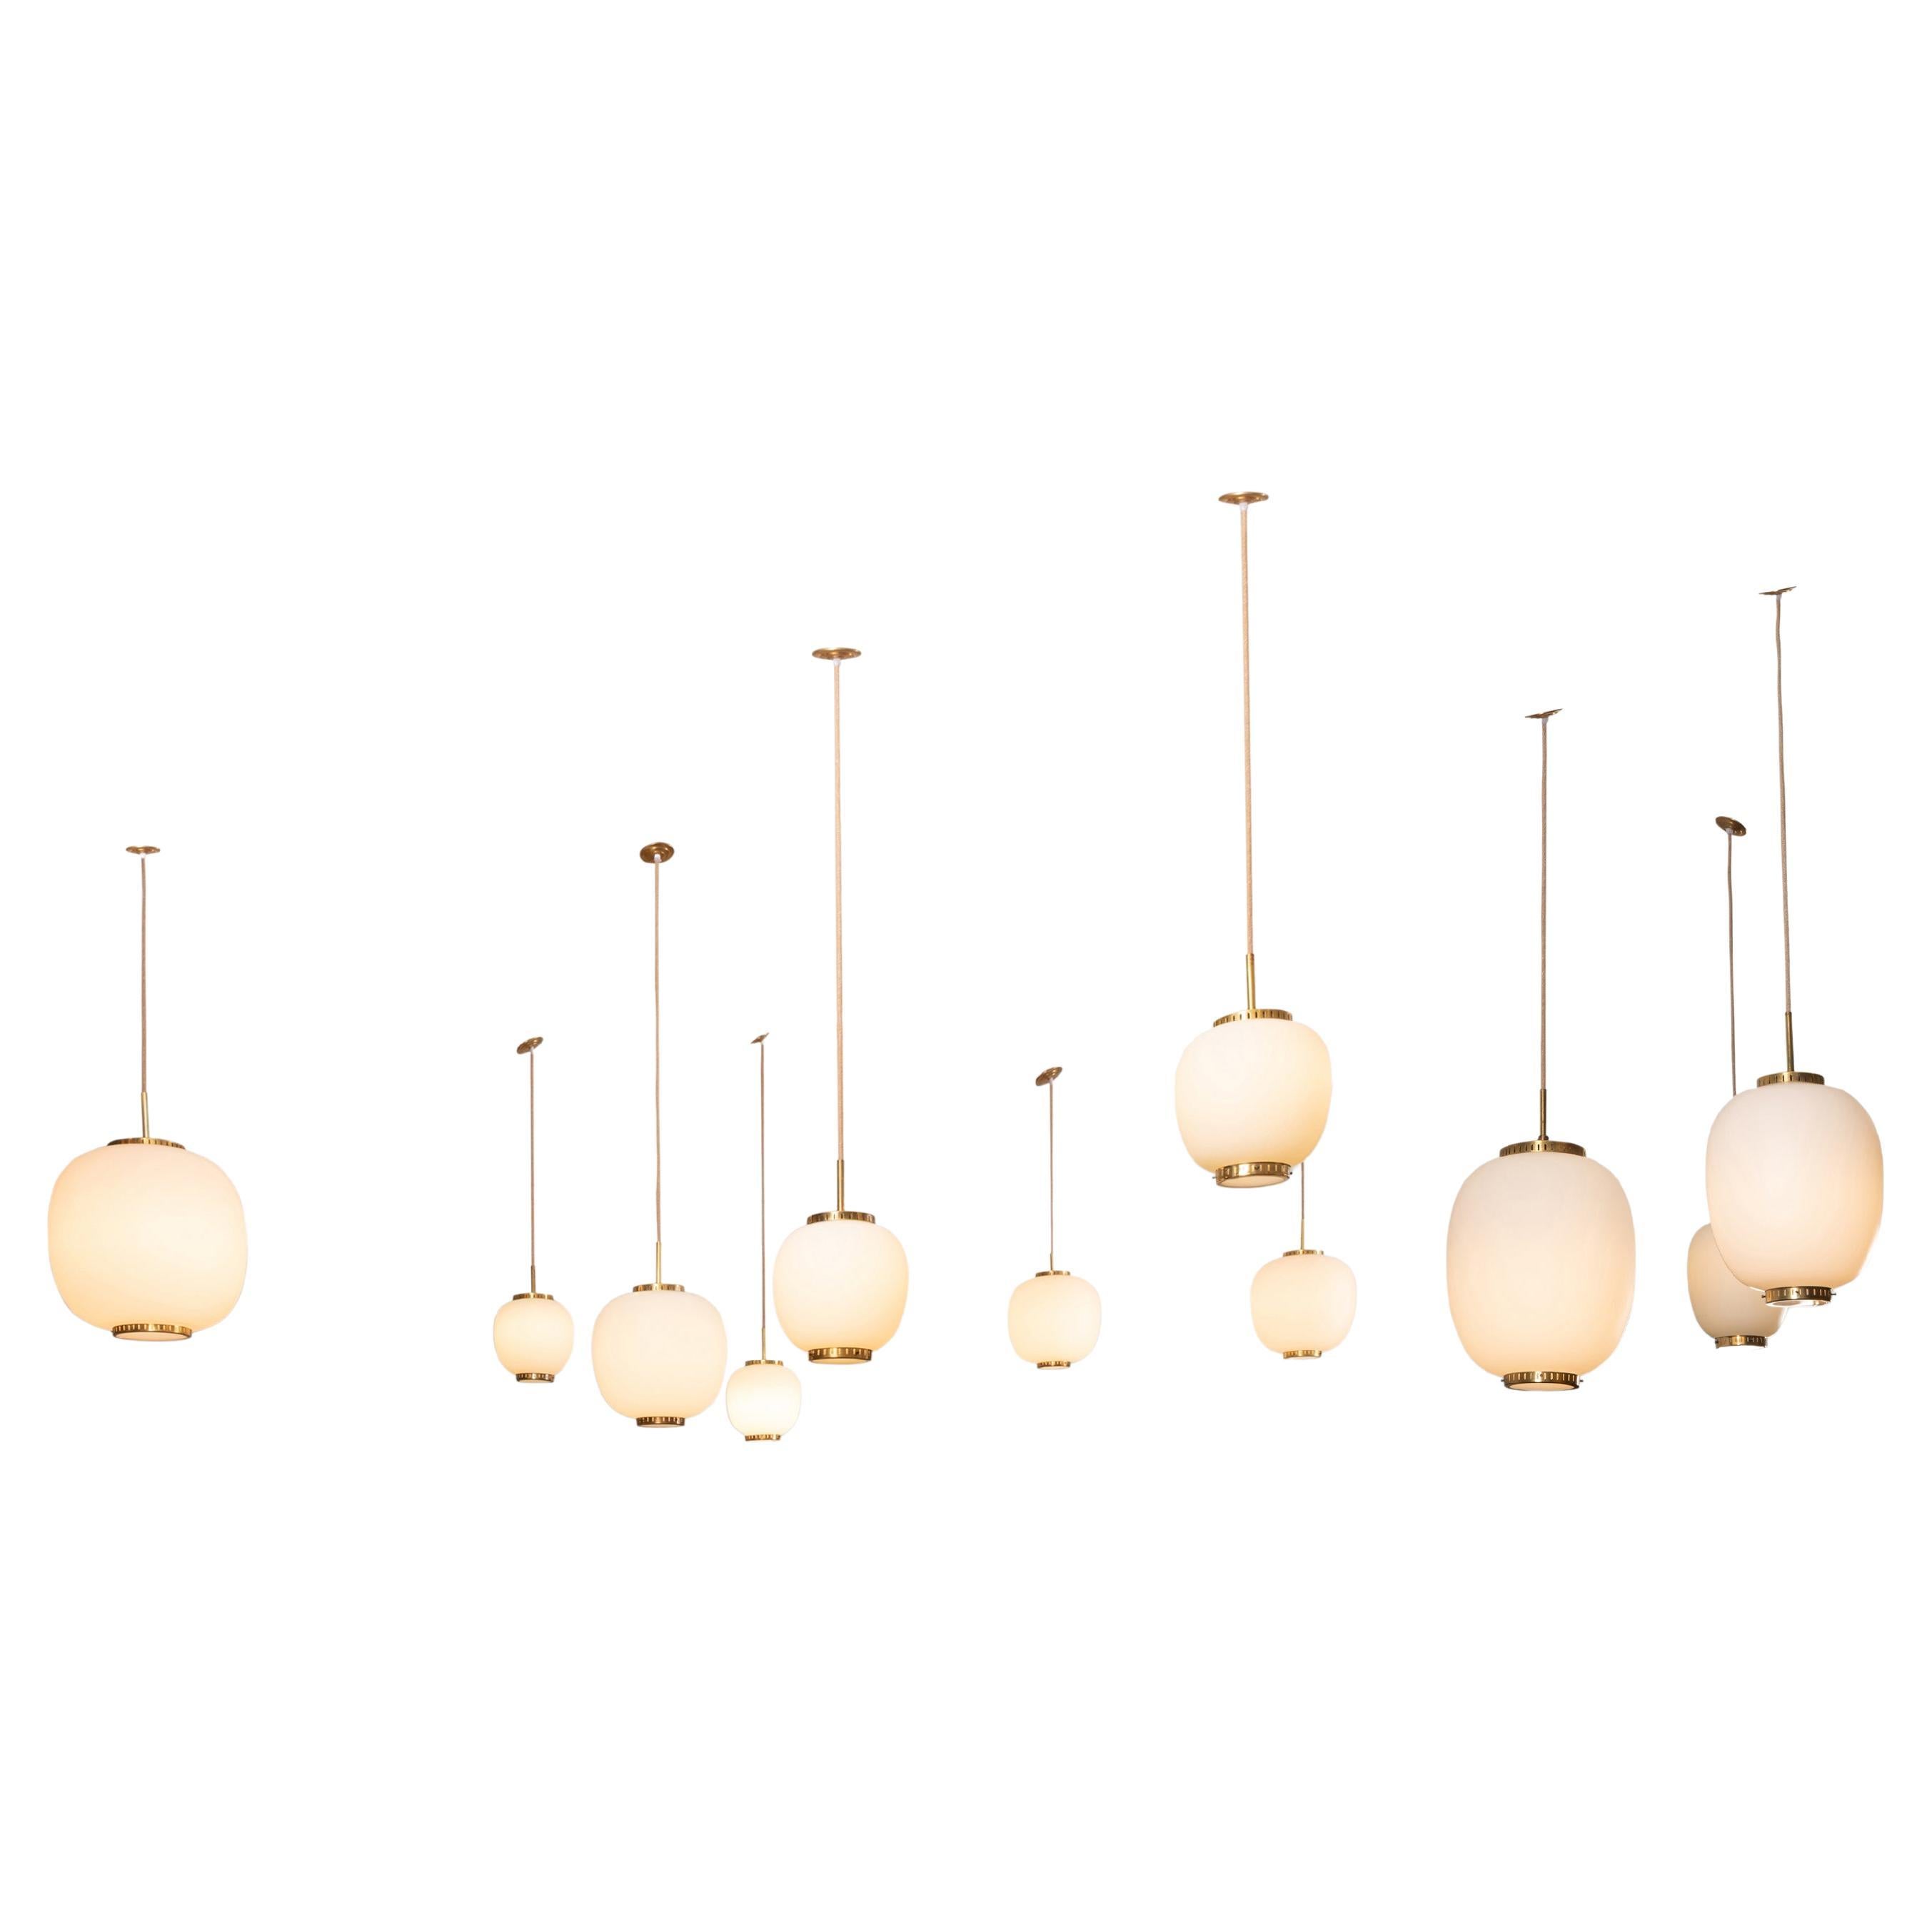 Collection of 10 Opaline Glass and Brass Ceiling Fixtures, Bent Karlby for Lyfa